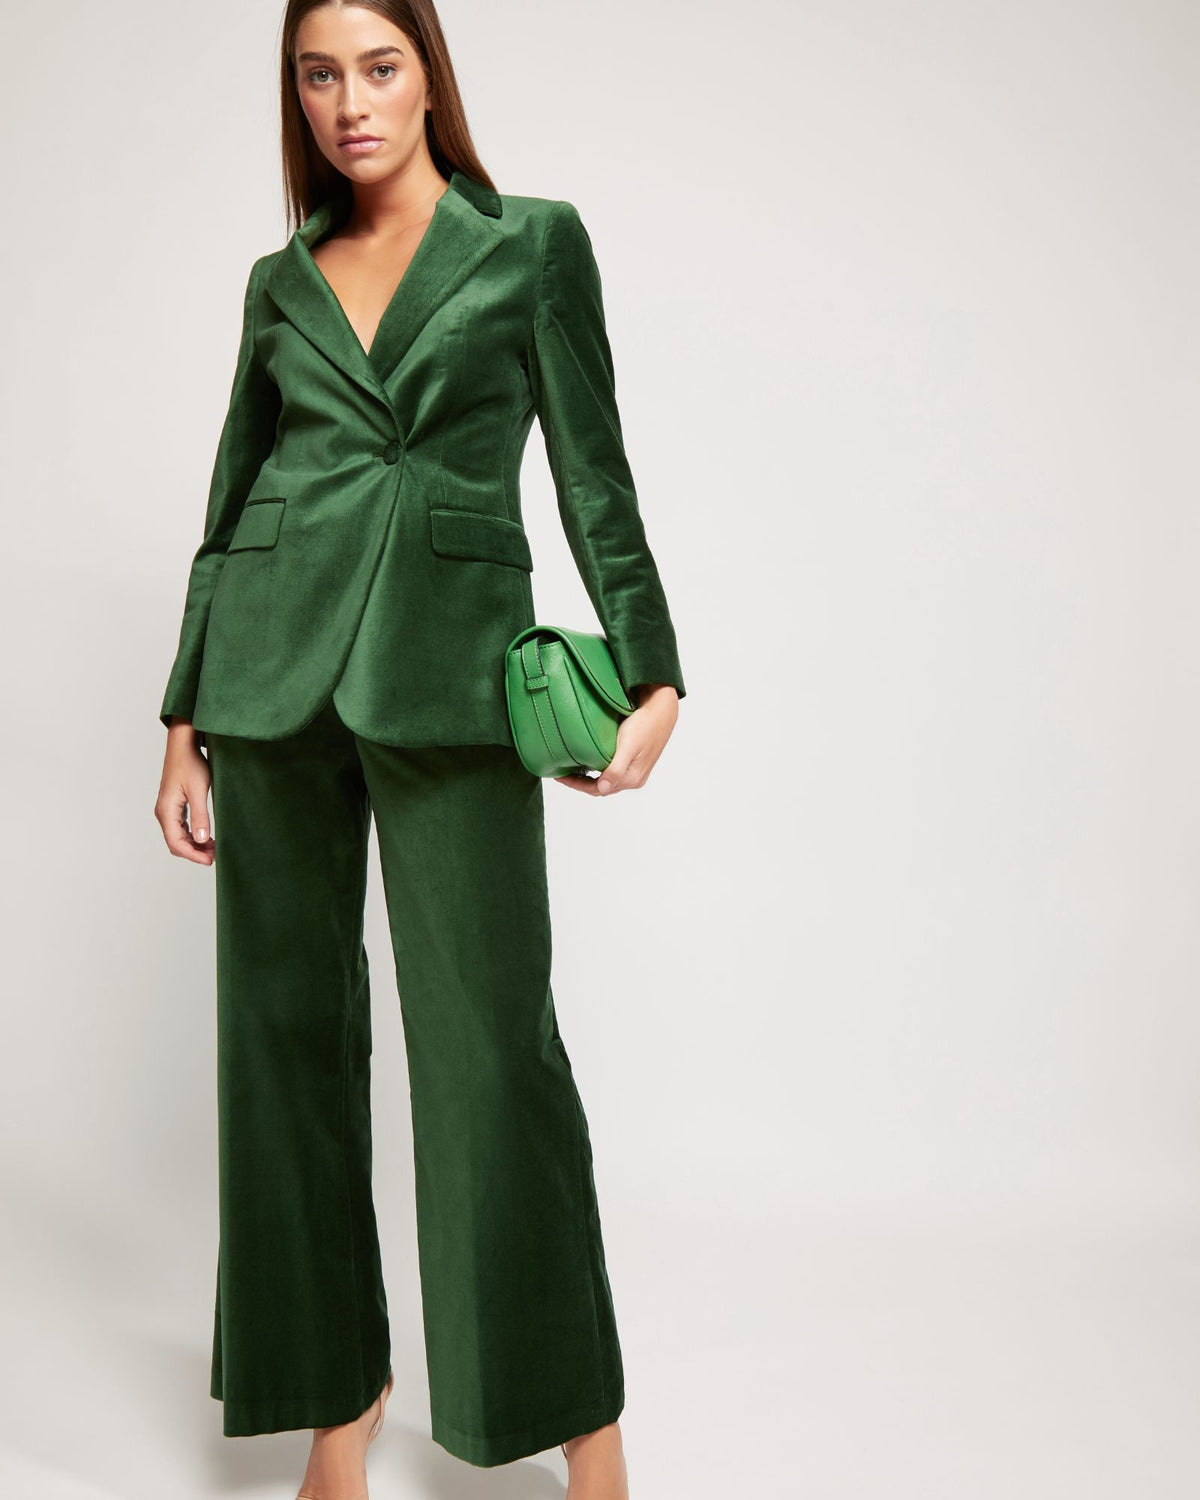 Dark Green High Waisted Velvet Pants Two Piece Pant Suit For Women Elegant  Slim Fit Office Business Formal Work Wear From Shulasi, $87.72 | DHgate.Com